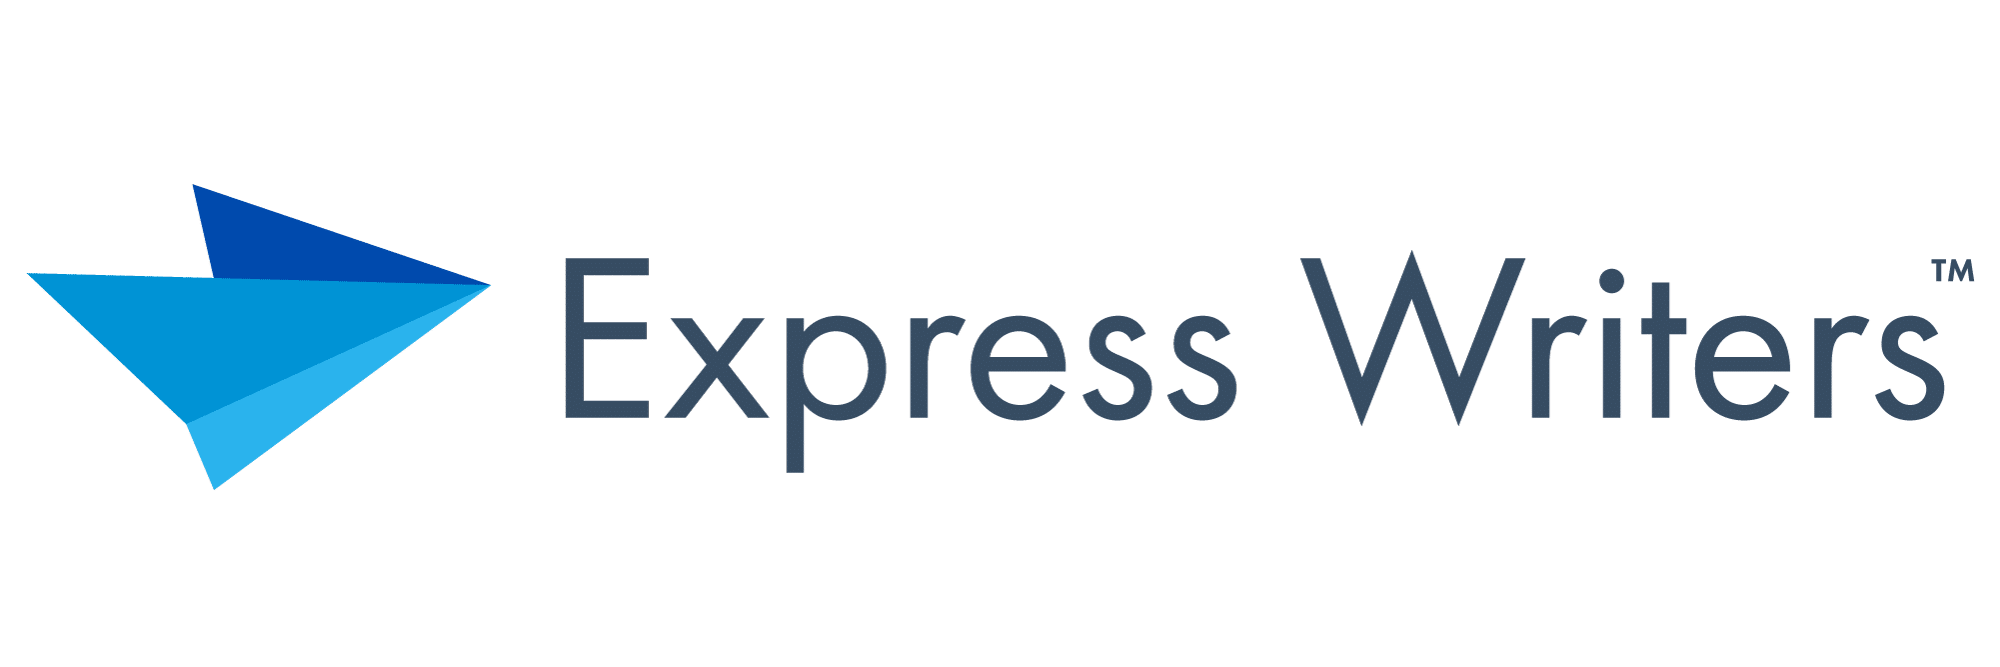 Express Writers Logo for Marketing Mistakes post